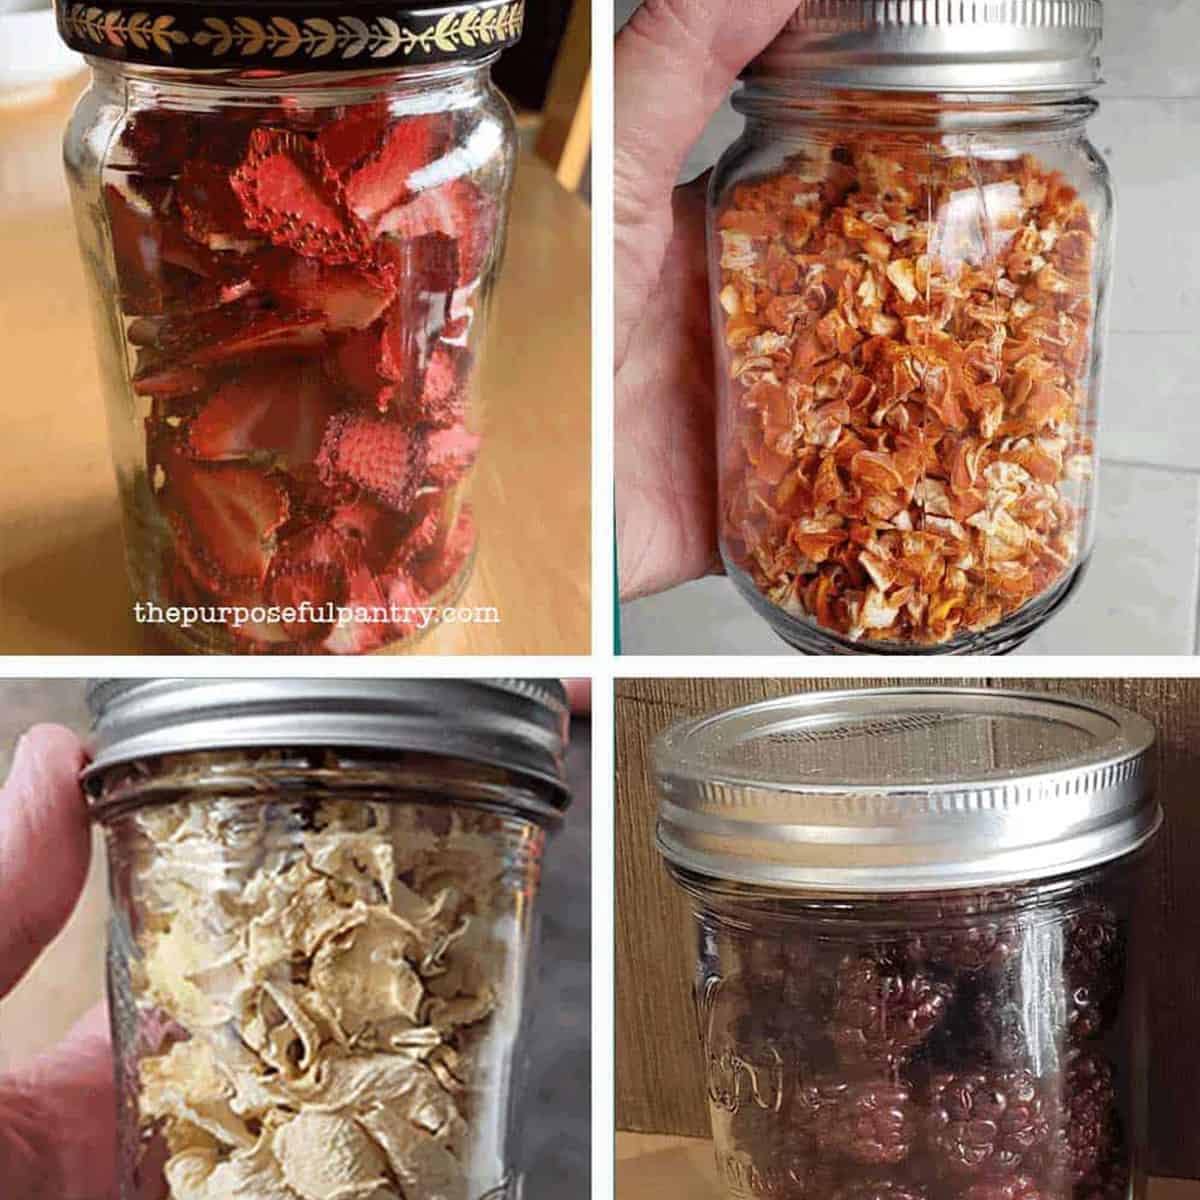 dehydrated food before and after